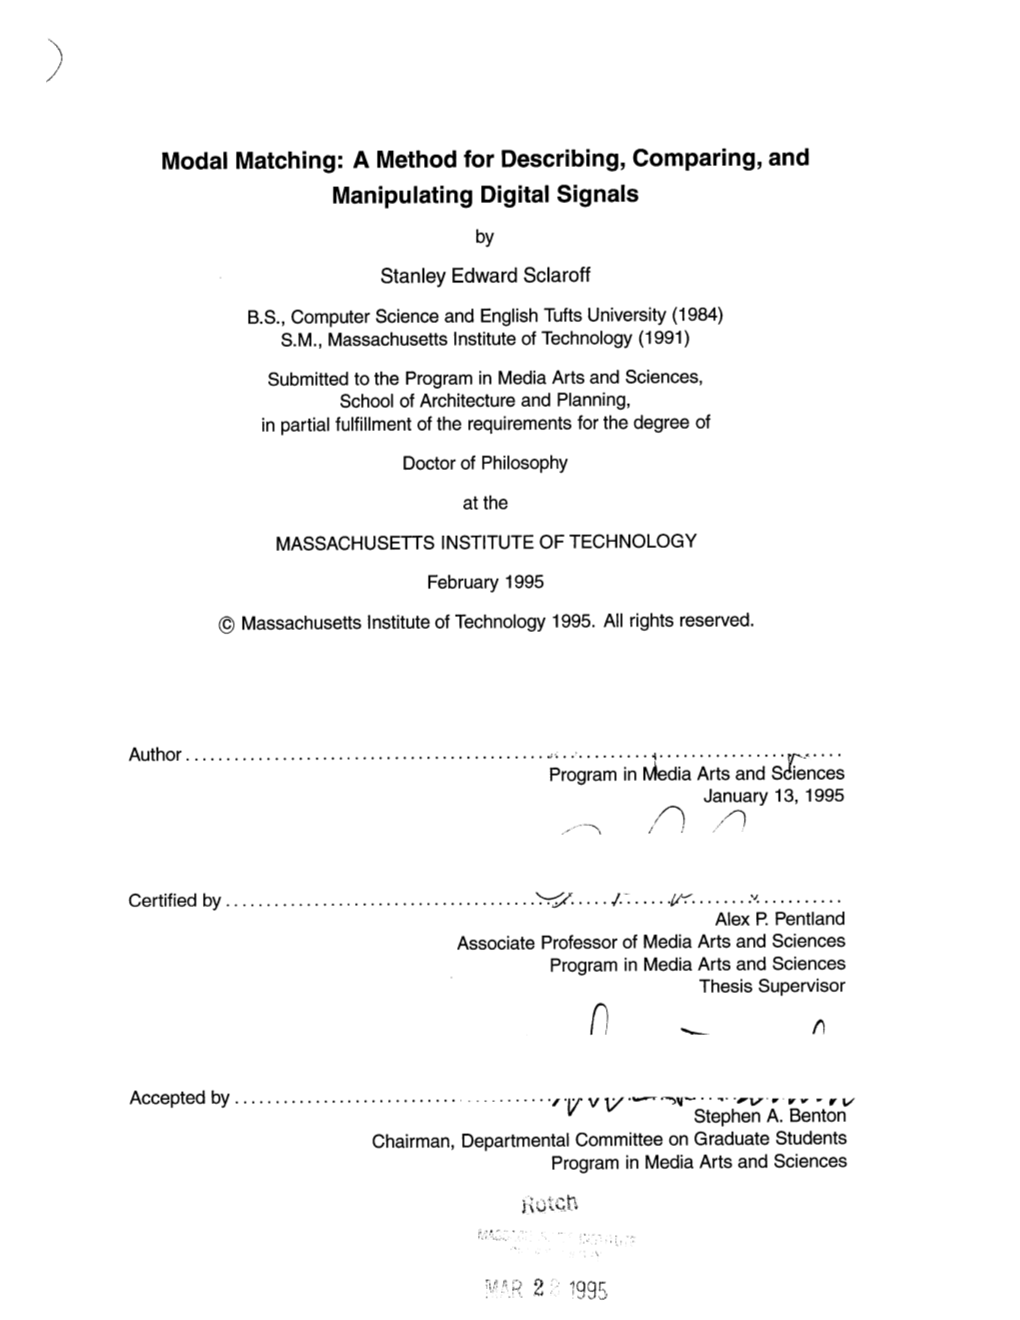 Modal Matching: a Method for Describing, Comparing, and Manipulating Digital Signals by Stanley Edward Sclaroff